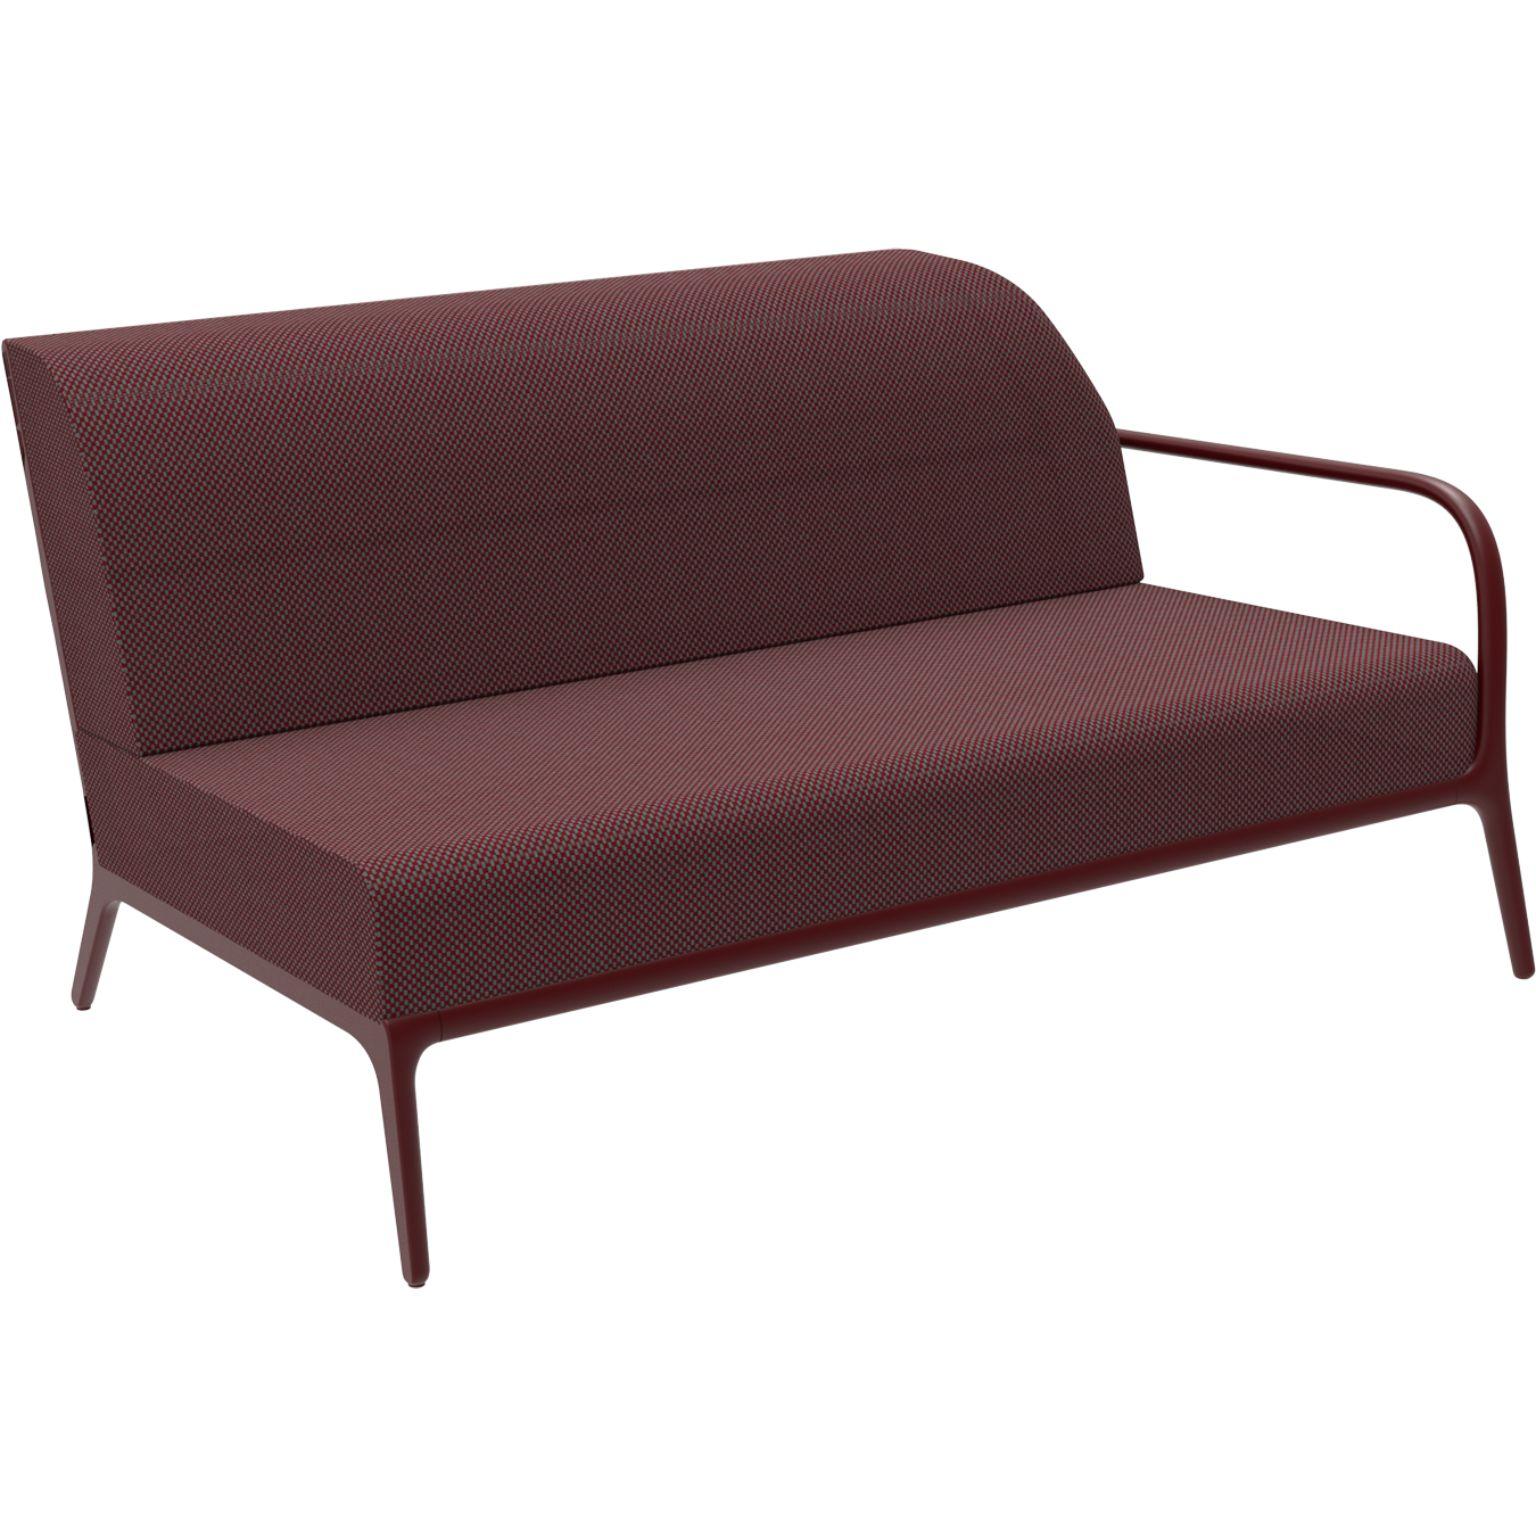 Xaloc left 160 burgundy modular sofa by MOWEE
Dimensions: D100 x W160 x H81 cm (Seat Height 42cm)
Material: Aluminium, Textile
Weight: 37 kg
Also Available in different colours and finishes. 

 Xaloc synthesizes the lines of interior furniture